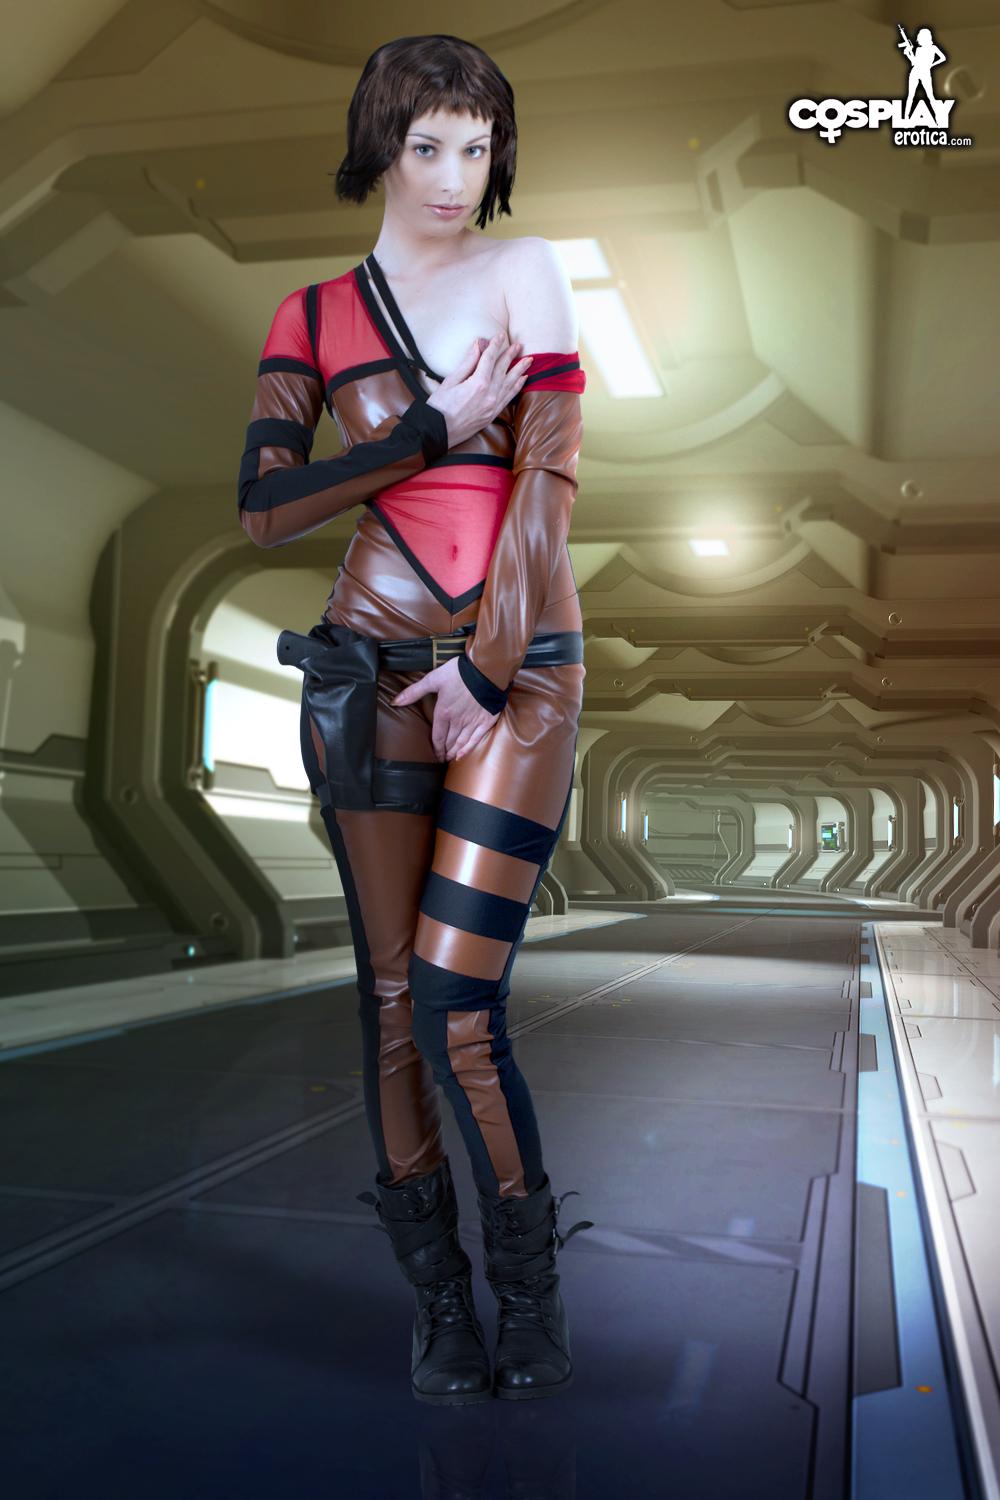 Cosplay babe Marylin is Rommie from Andromeda #59427427